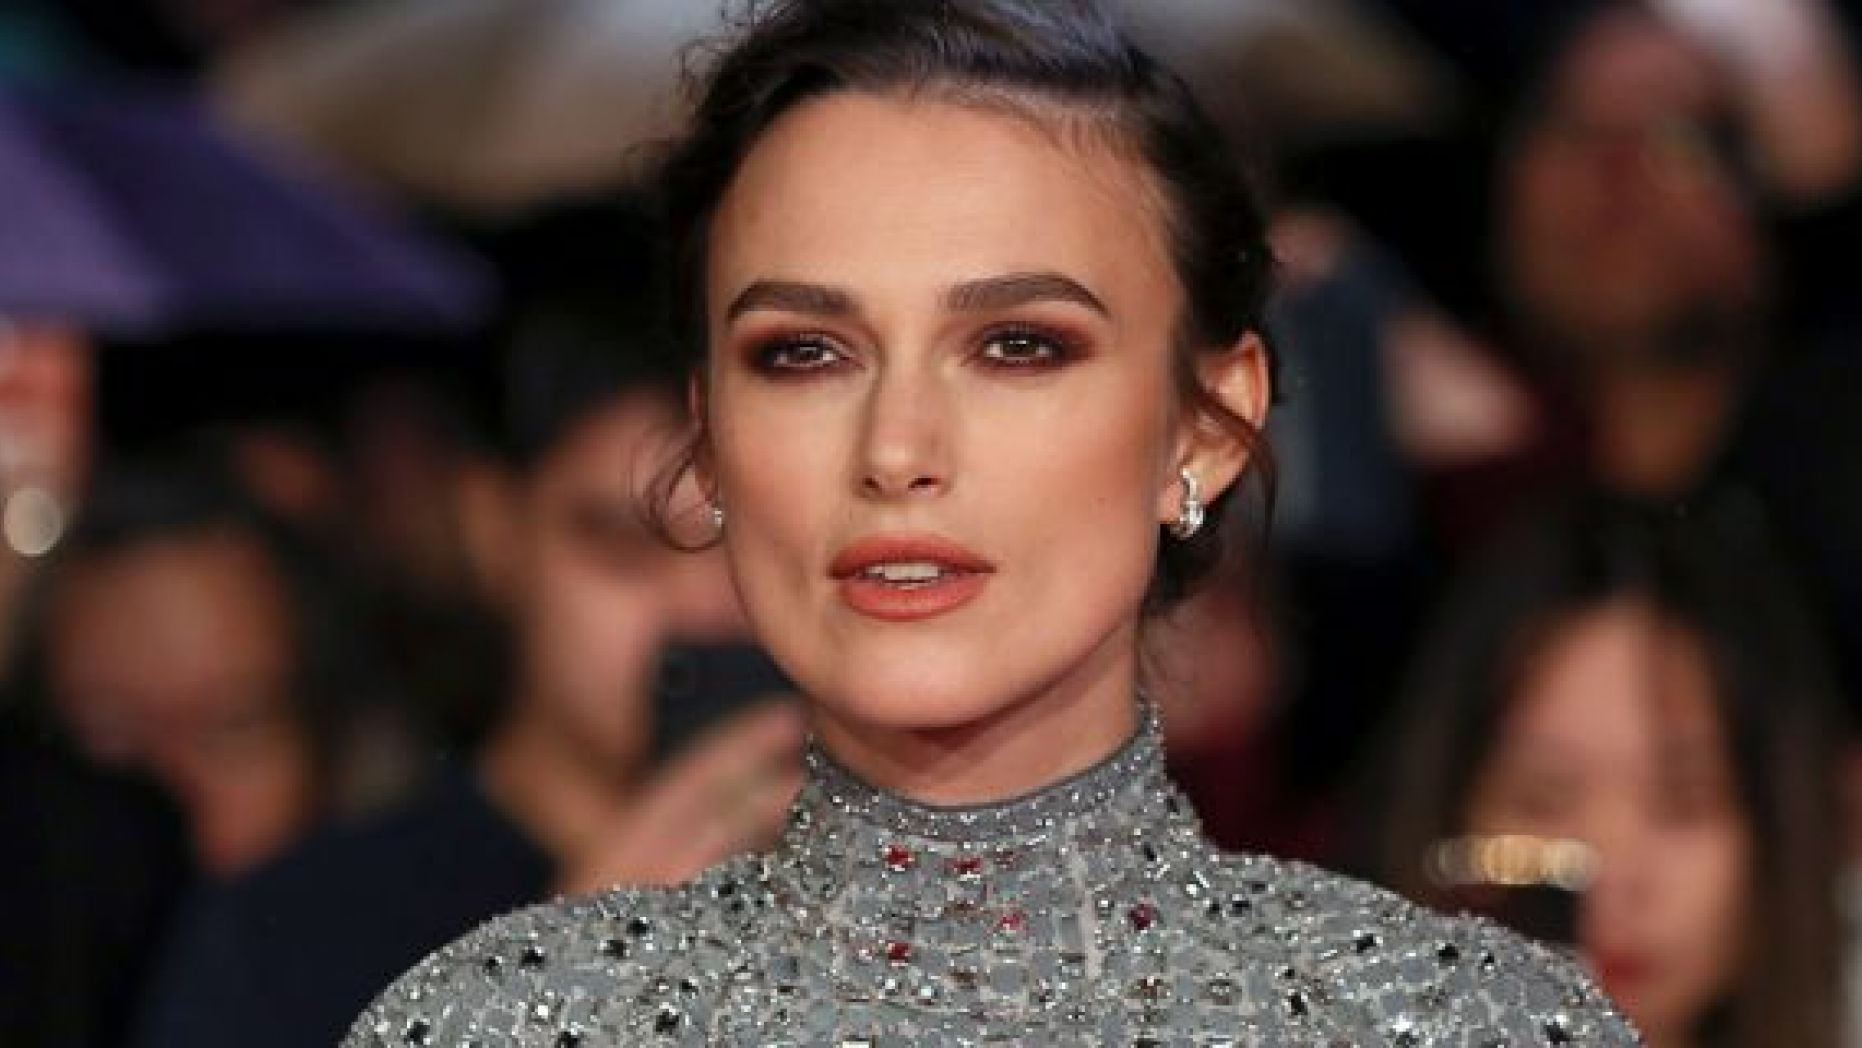 English actress Keira Knightley is setting limits on her daughter's viewing habits.